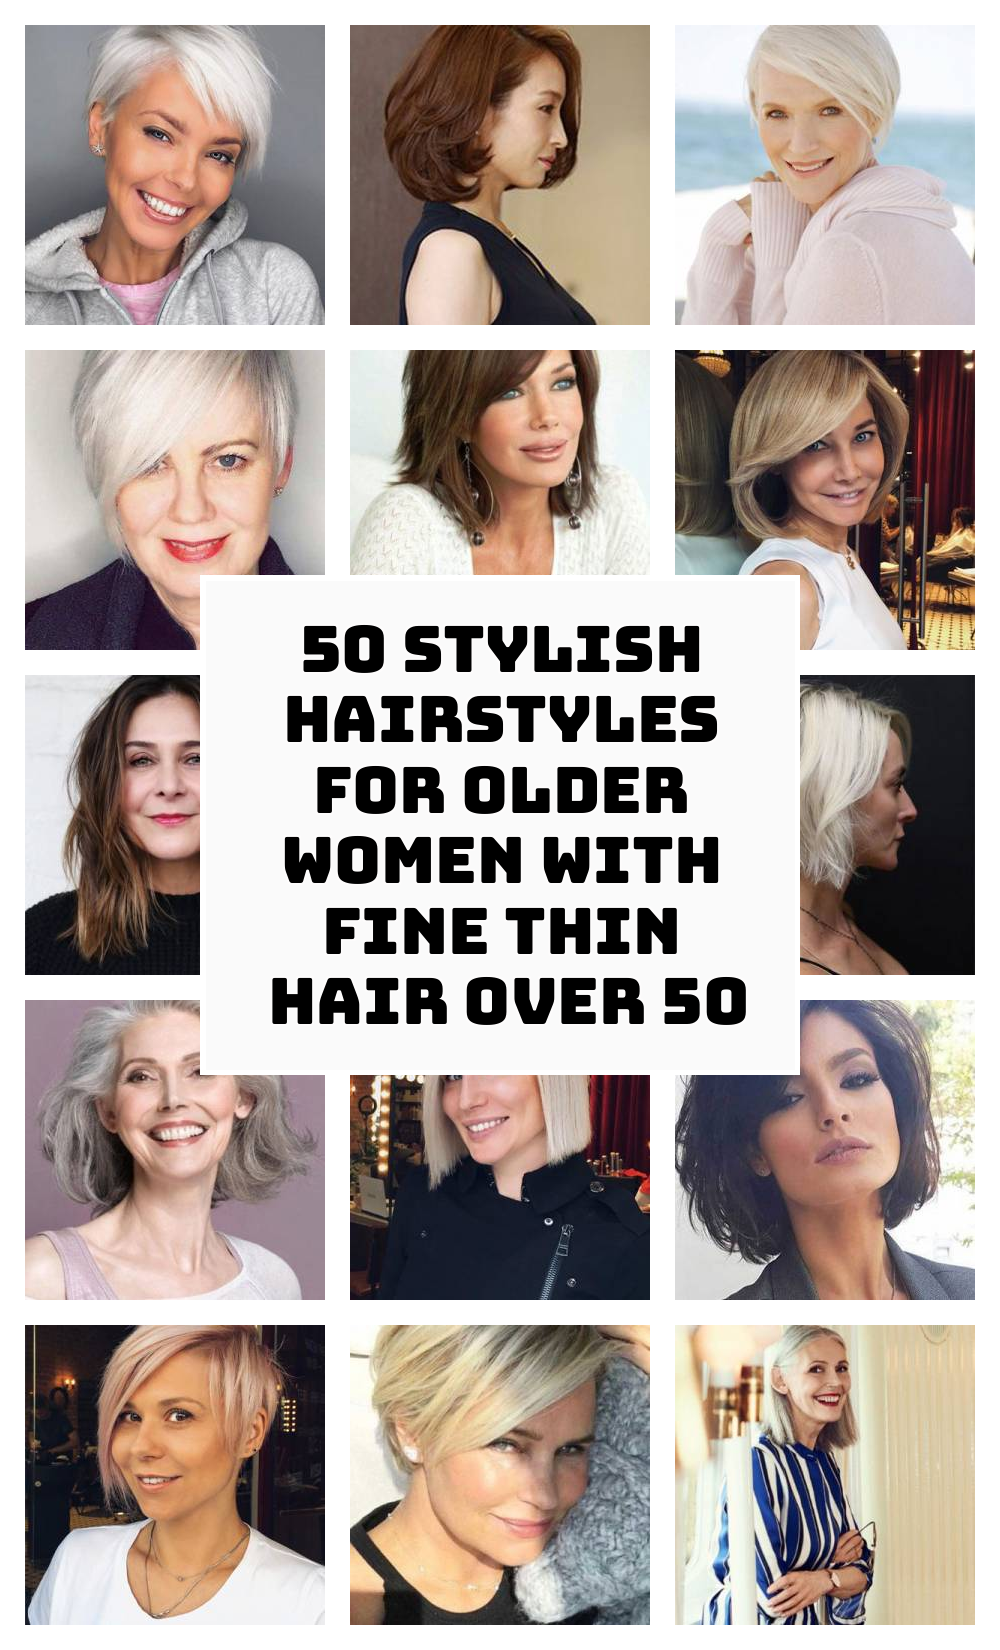 50 Stylish hairstyles for older women with fine thin hair over 50